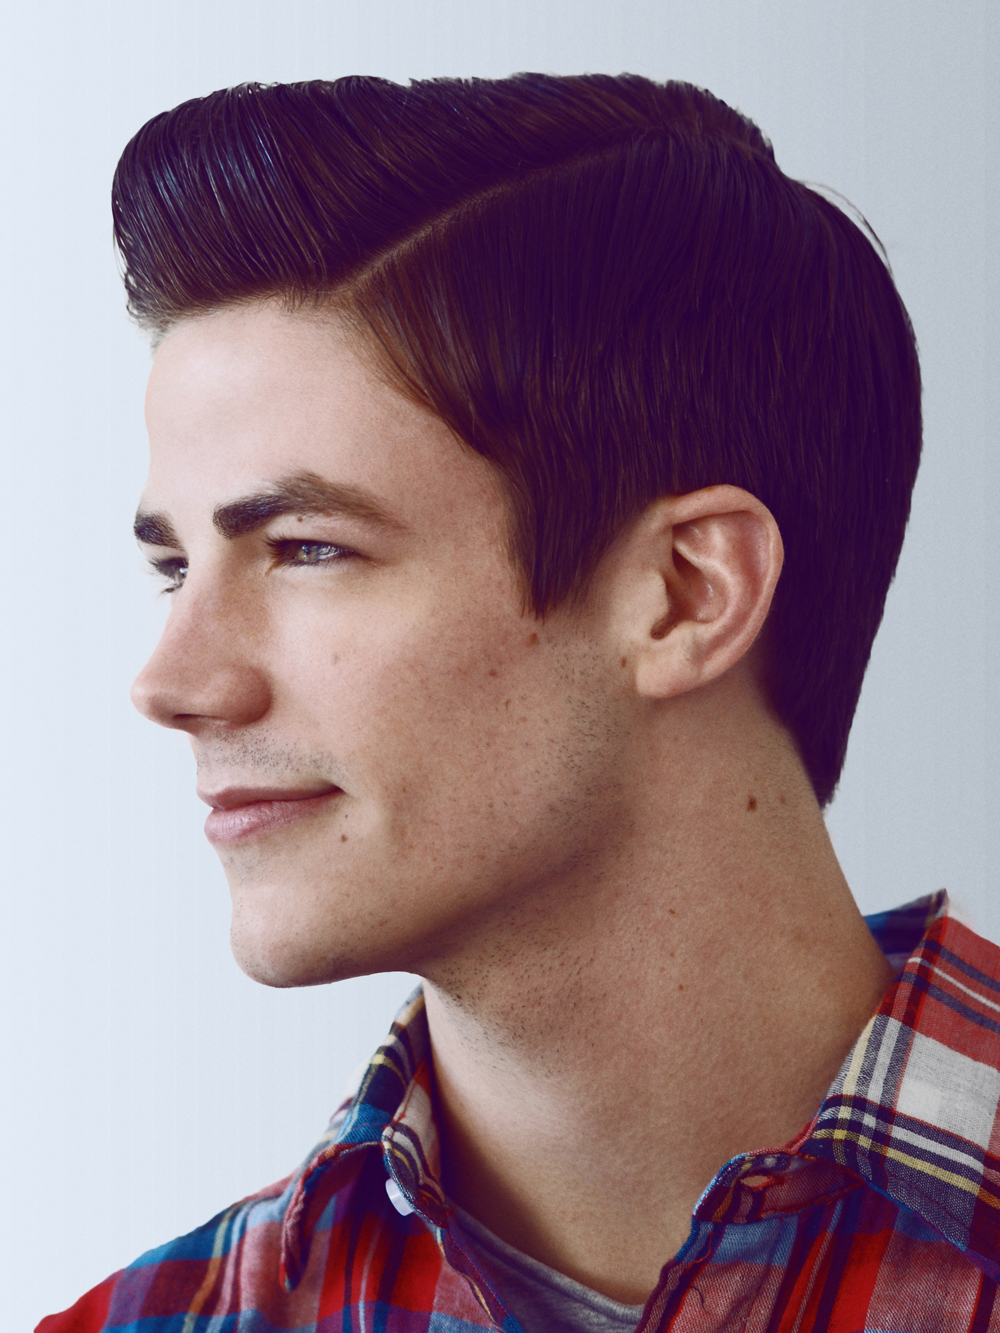 General photo of Grant Gustin